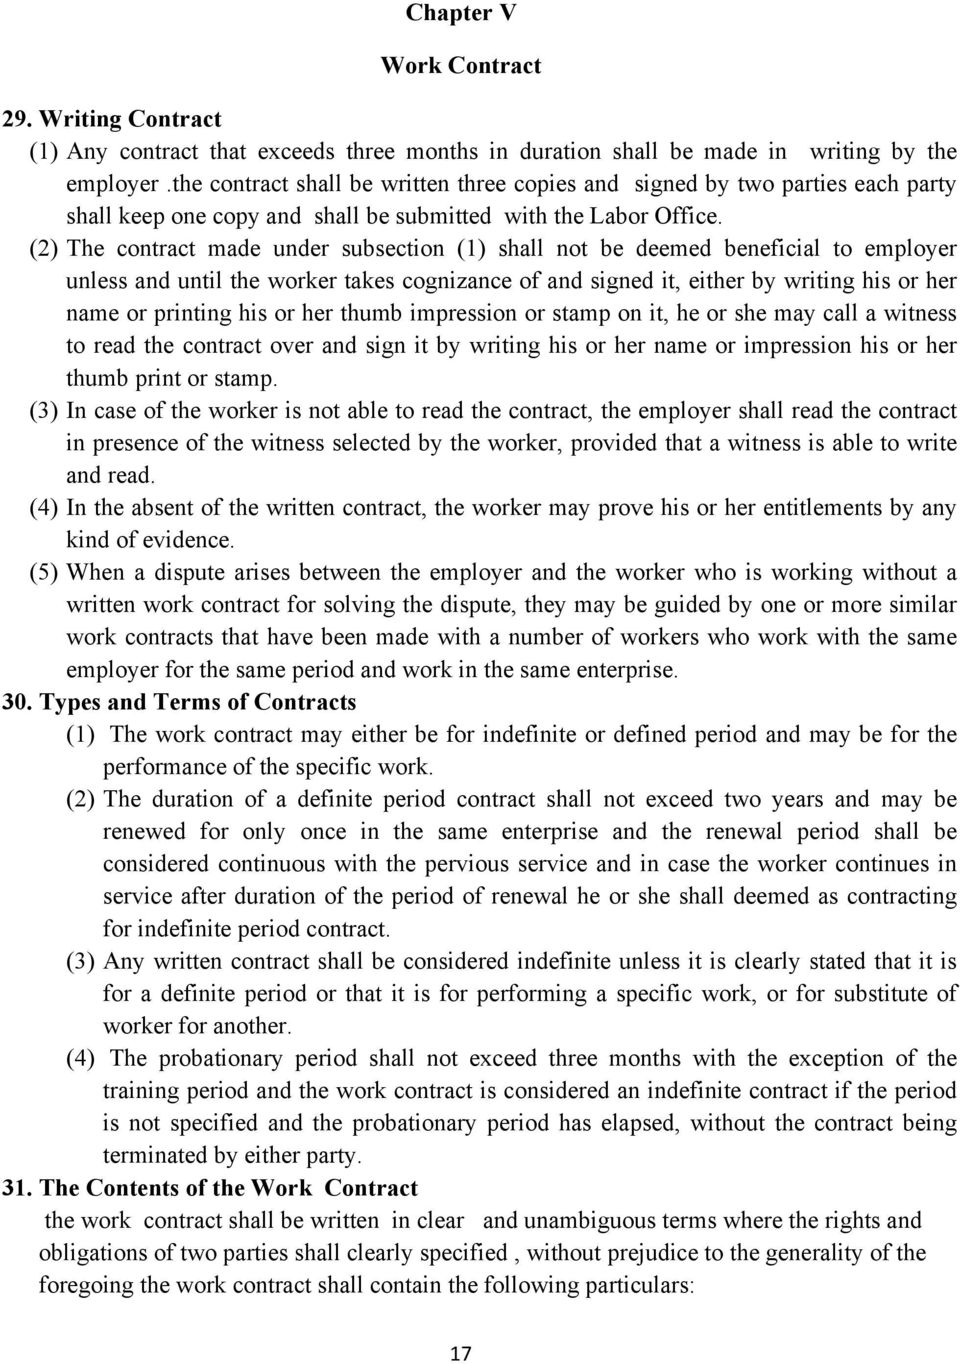 (2) The contract made under subsection (1) shall not be deemed beneficial to employer unless and until the worker takes cognizance of and signed it, either by writing his or her name or printing his